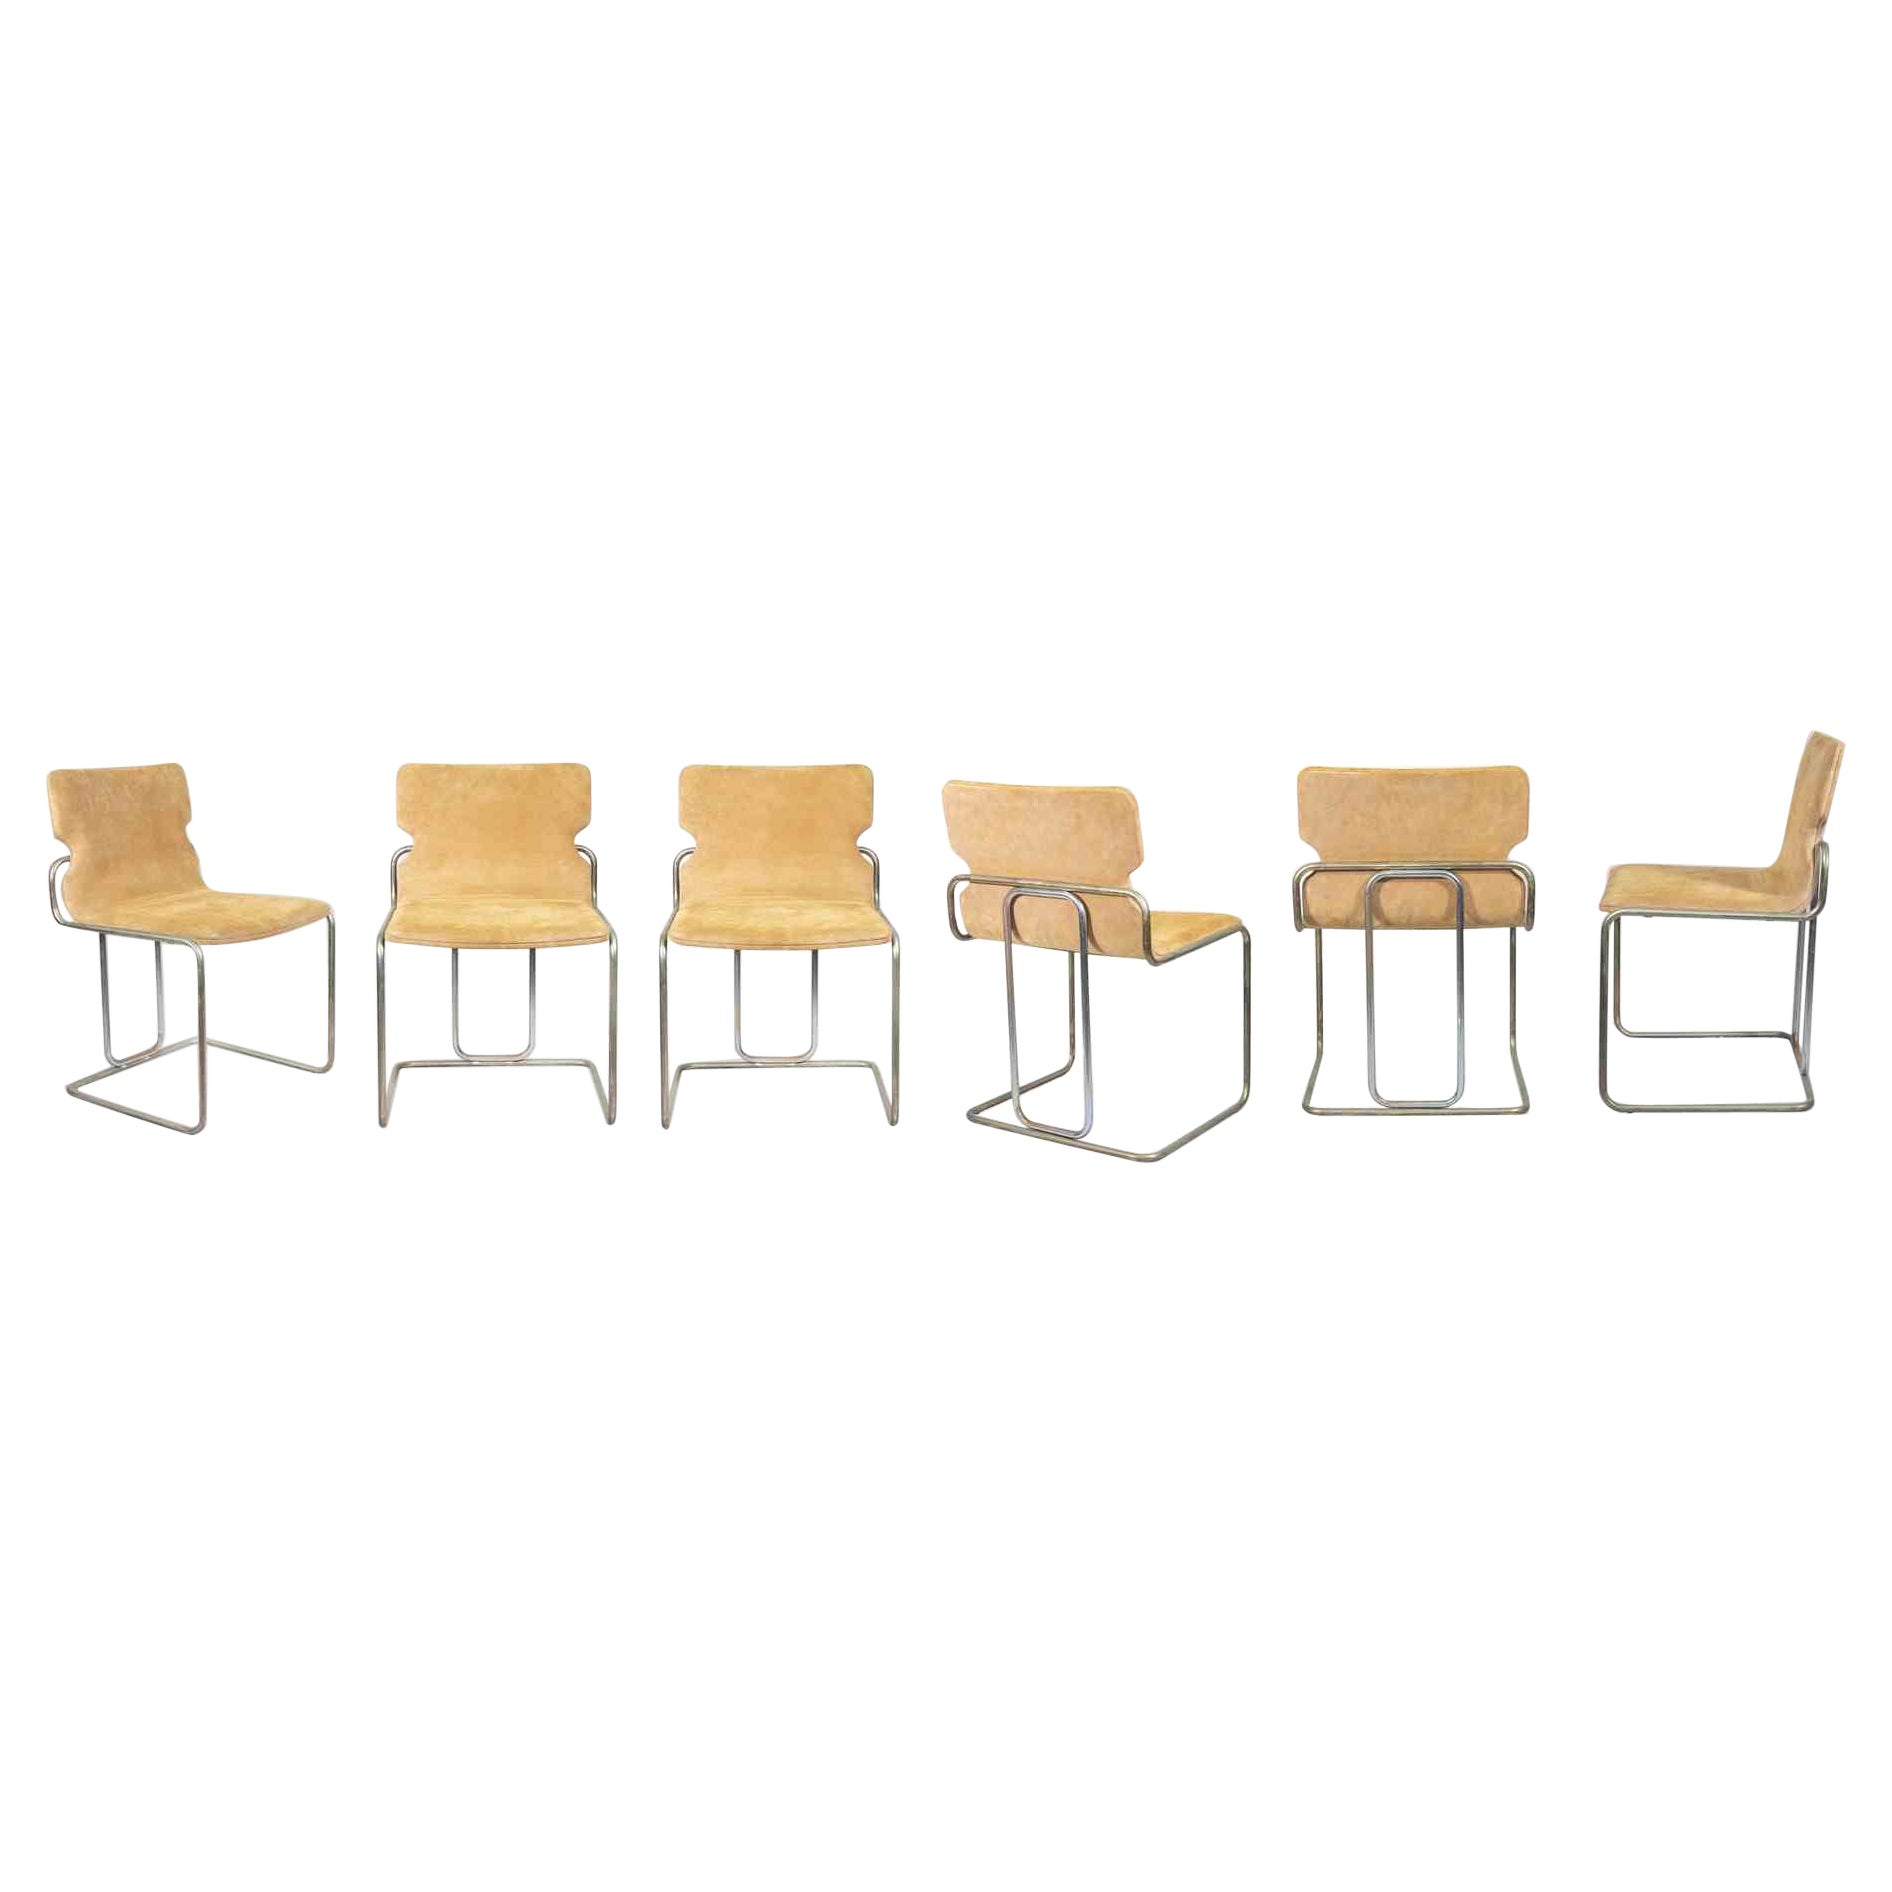 Set of 6 Vintage Chairs by Willy Rizzo, Italy, 1970s